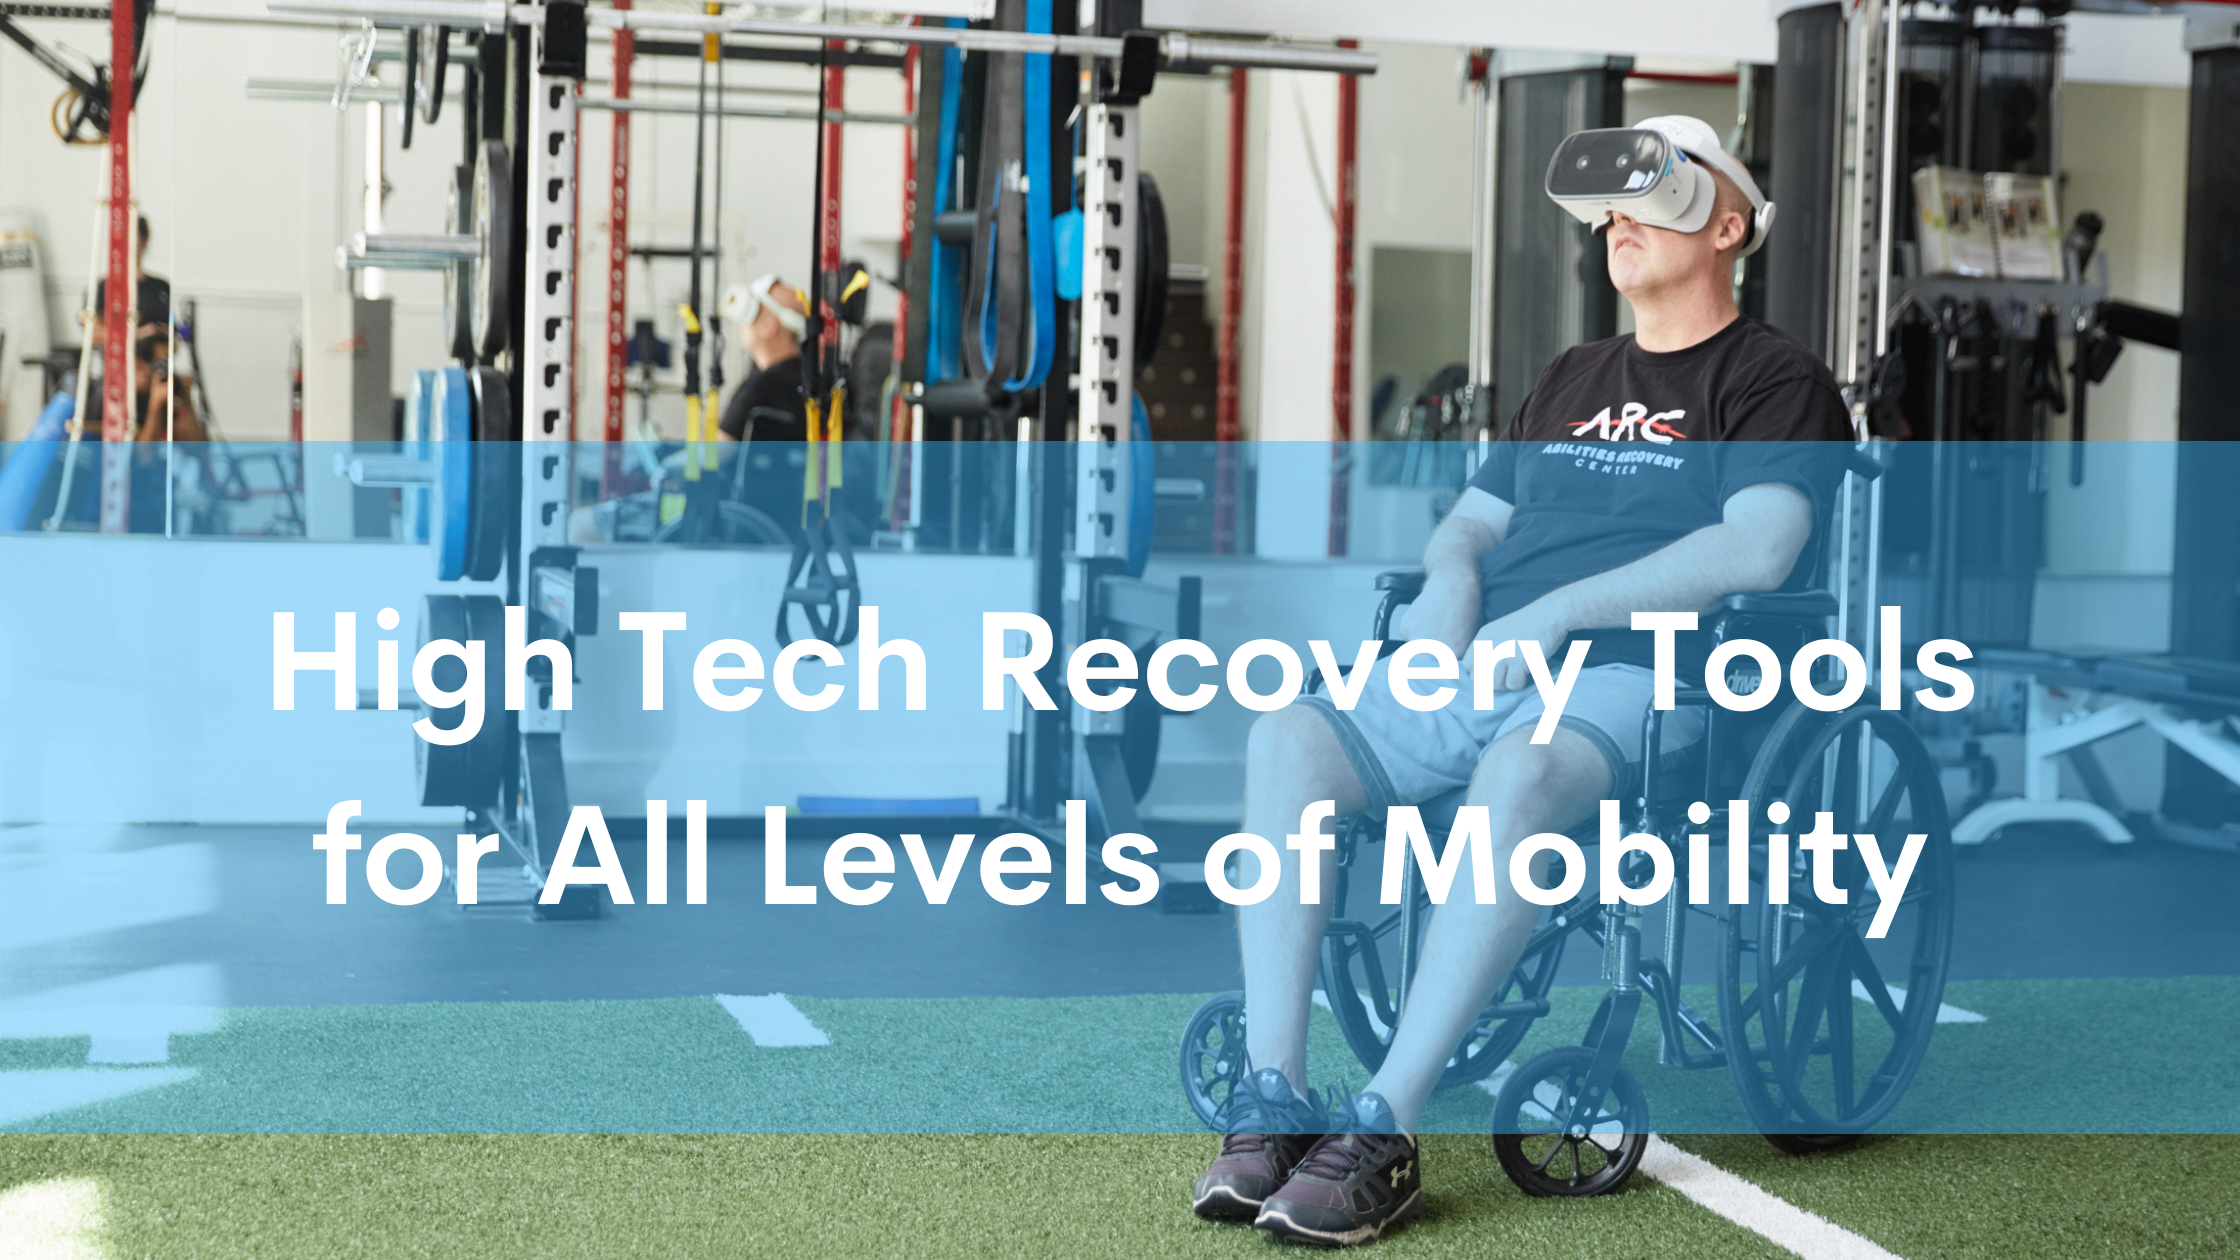 High Tech Recovery Tools for All Levels of Mobility